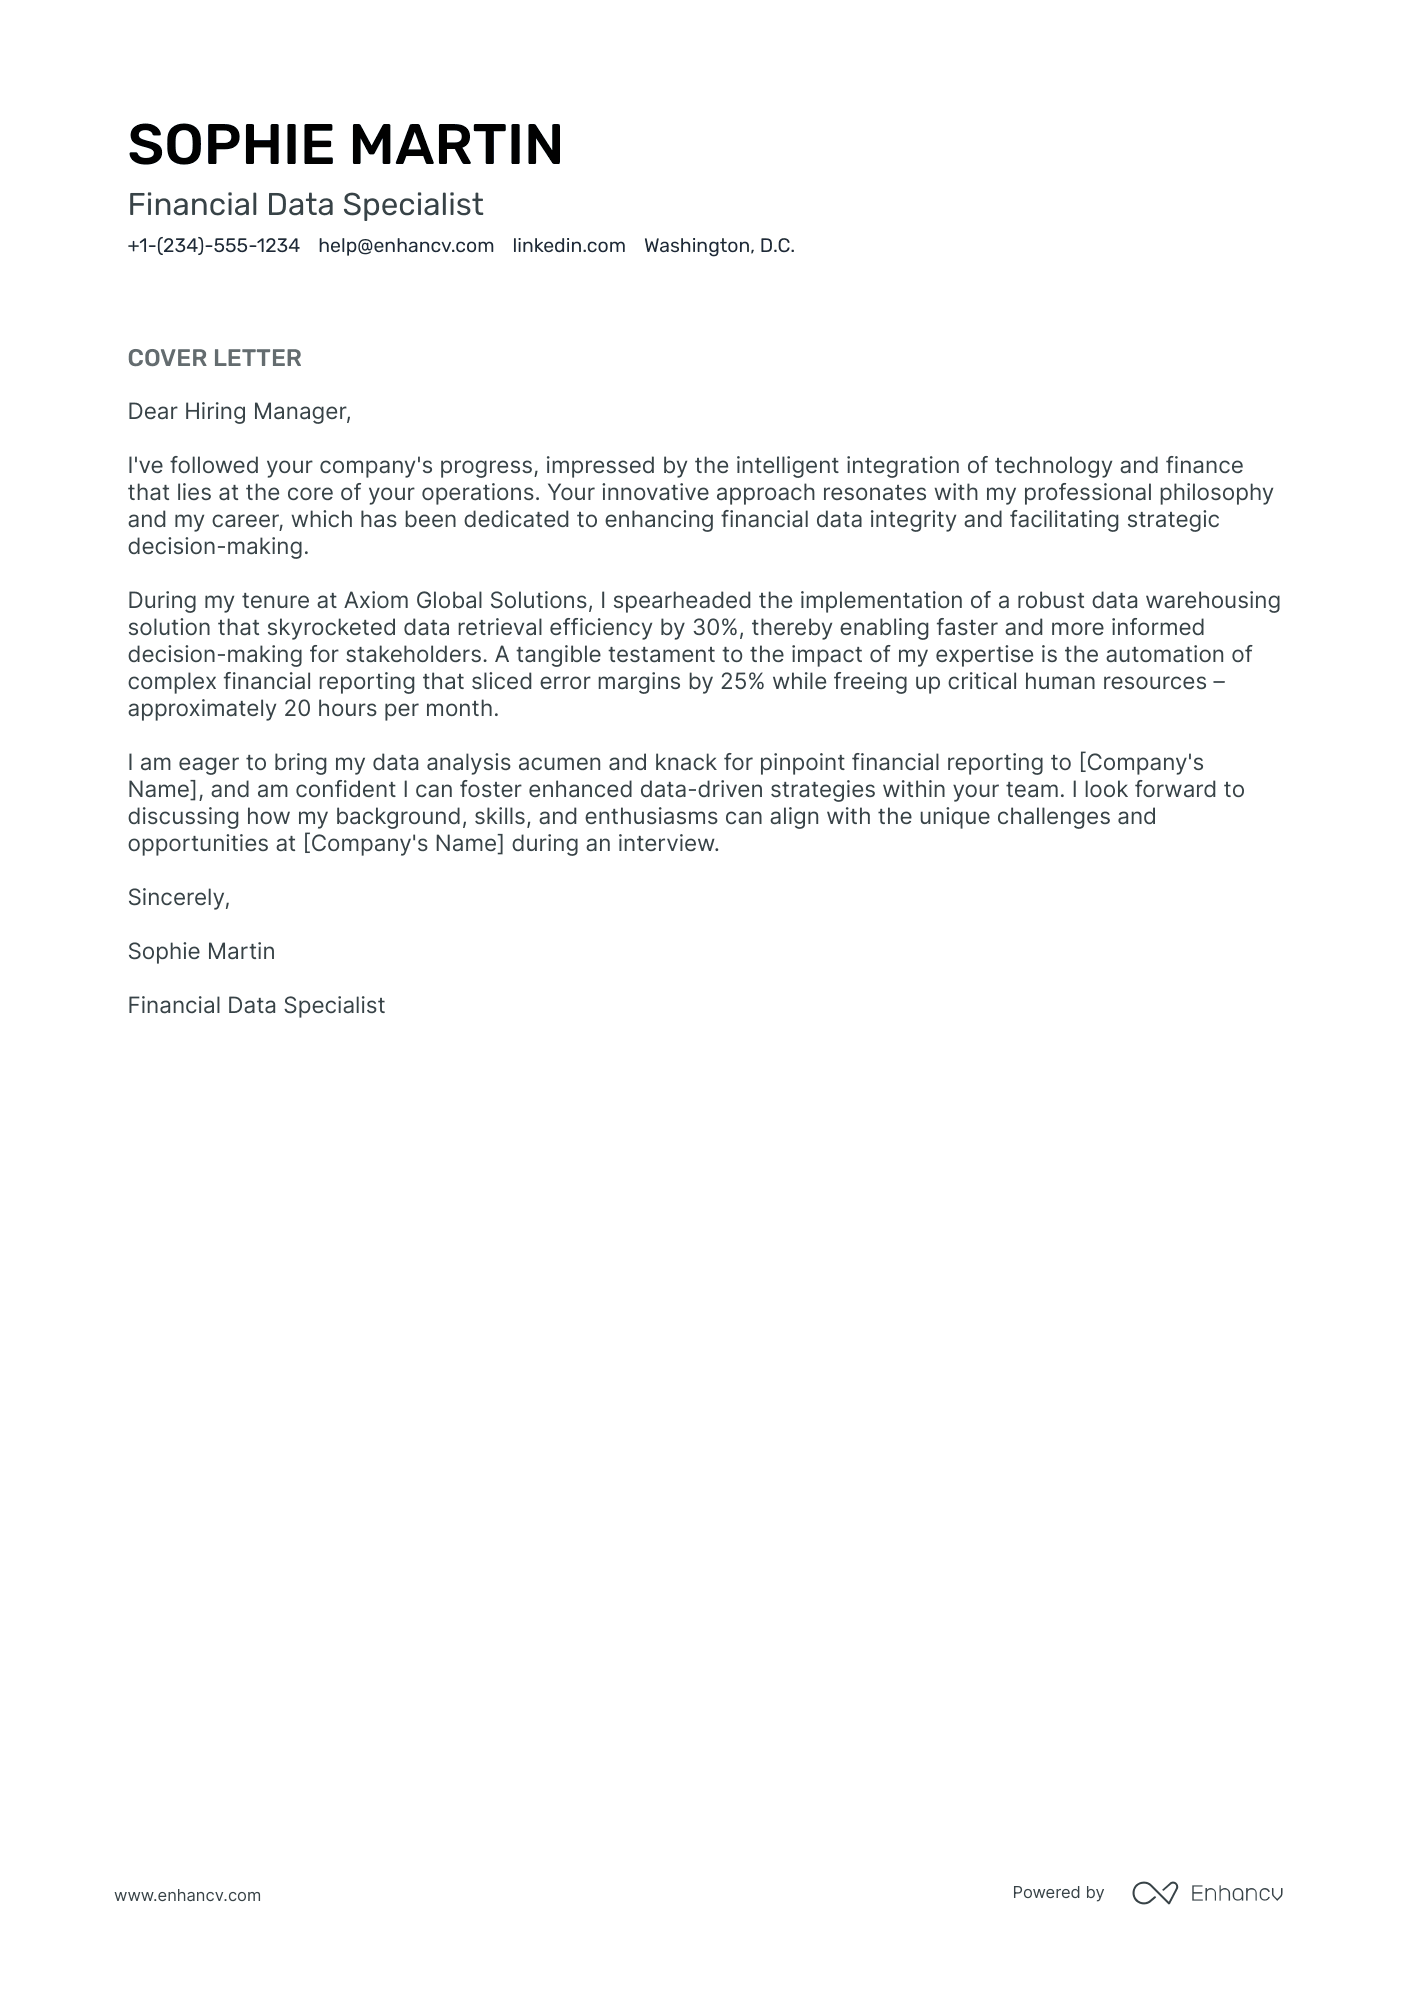 Data Specialist cover letter